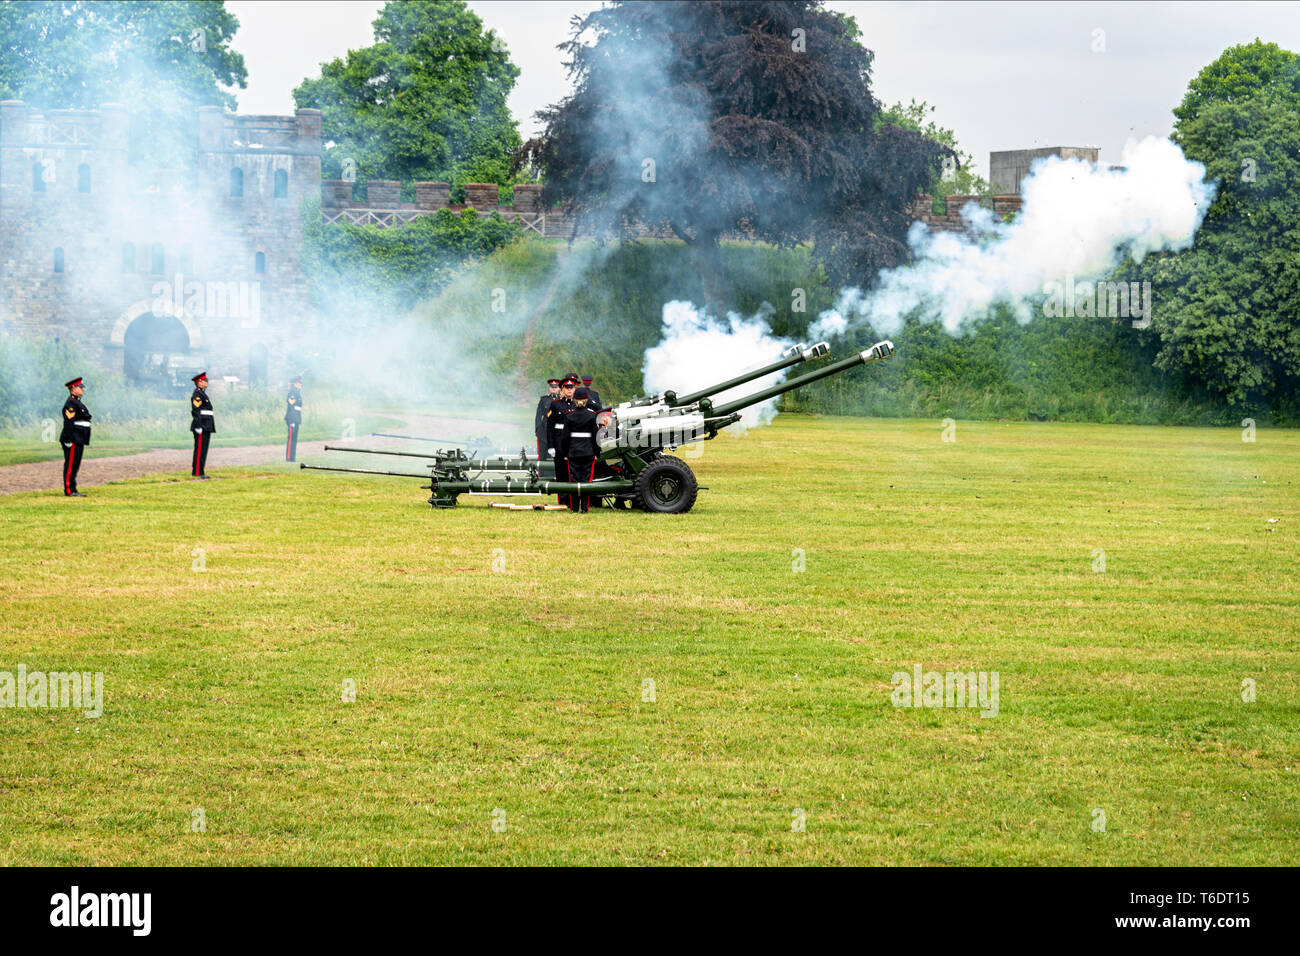 UK, Cardiff - 09 June 2018 -  104 Regiment Royal Artillery fire a 21 Gun salute as part of the official  birthday celebrations for Queen Elizabeth II  Stock Photo